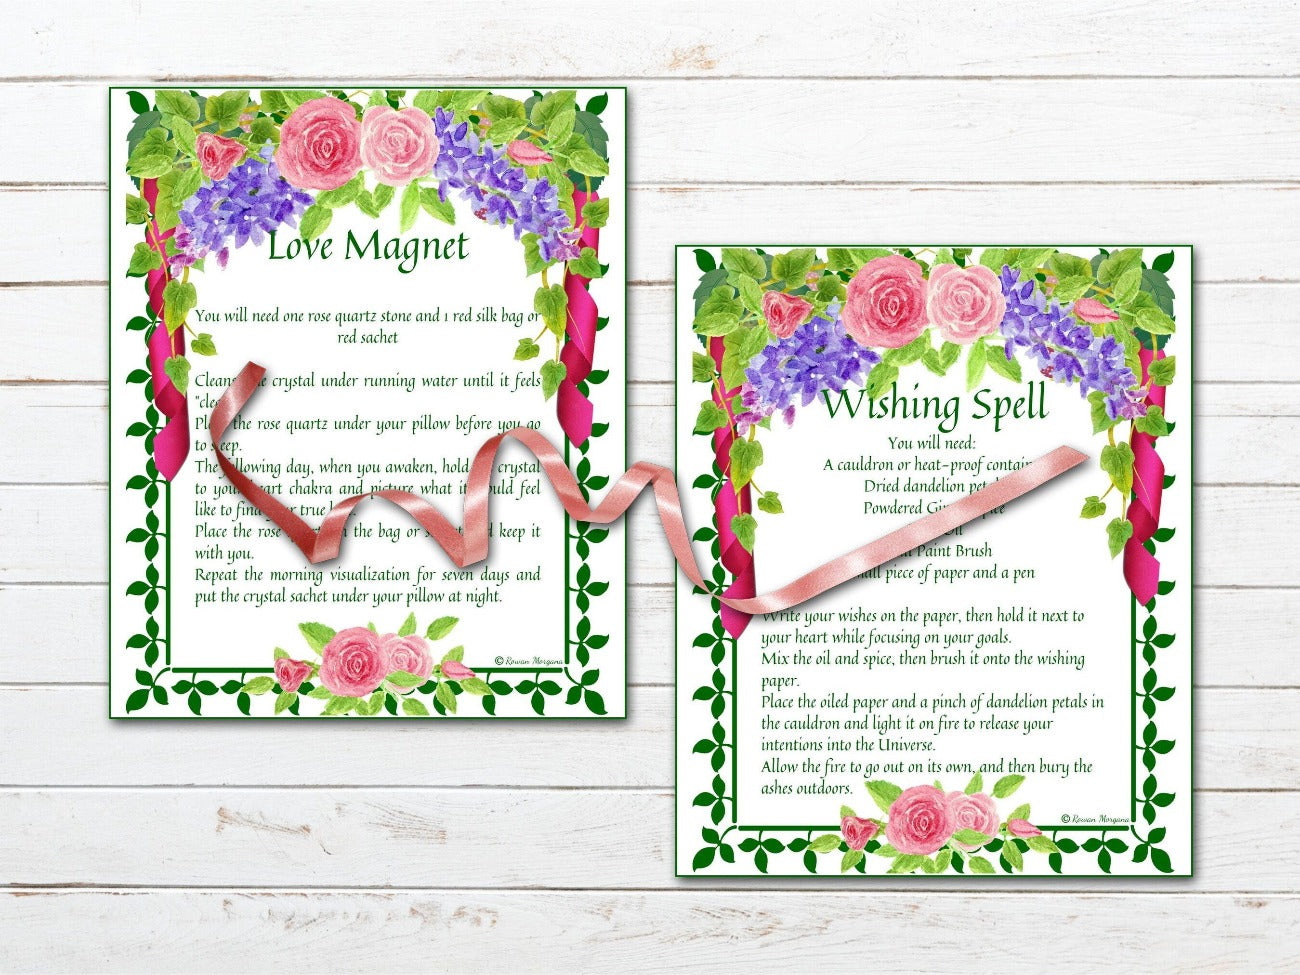 BELTANE SPELL CARDS, Have a white background, green ivy border and pretty pastel florals at the top and bottom. Love Magnet Spell and Wishing Spell cards are featured - Morgana Magick Spell